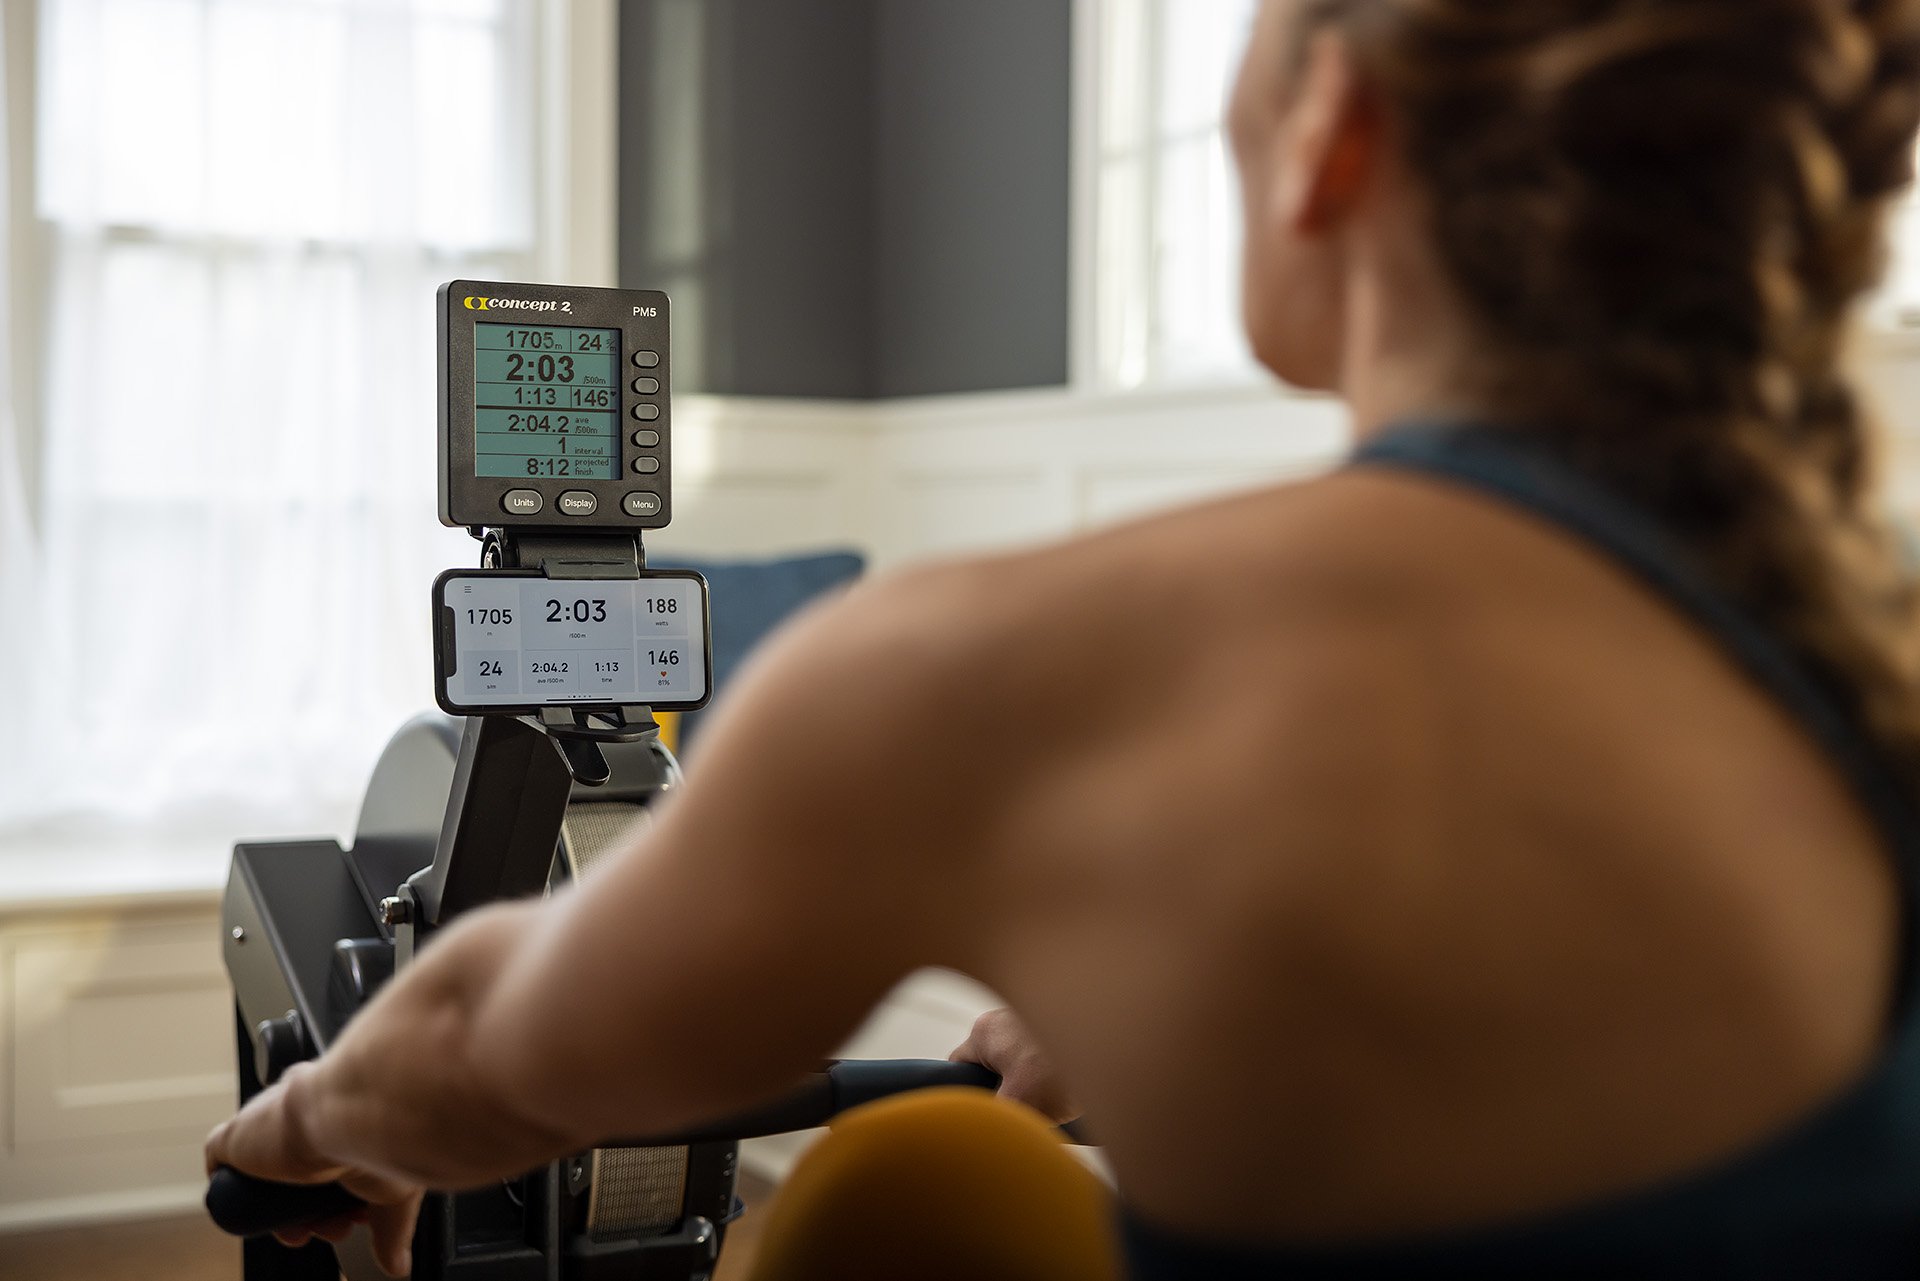 Woman rowing while using the ErgData app